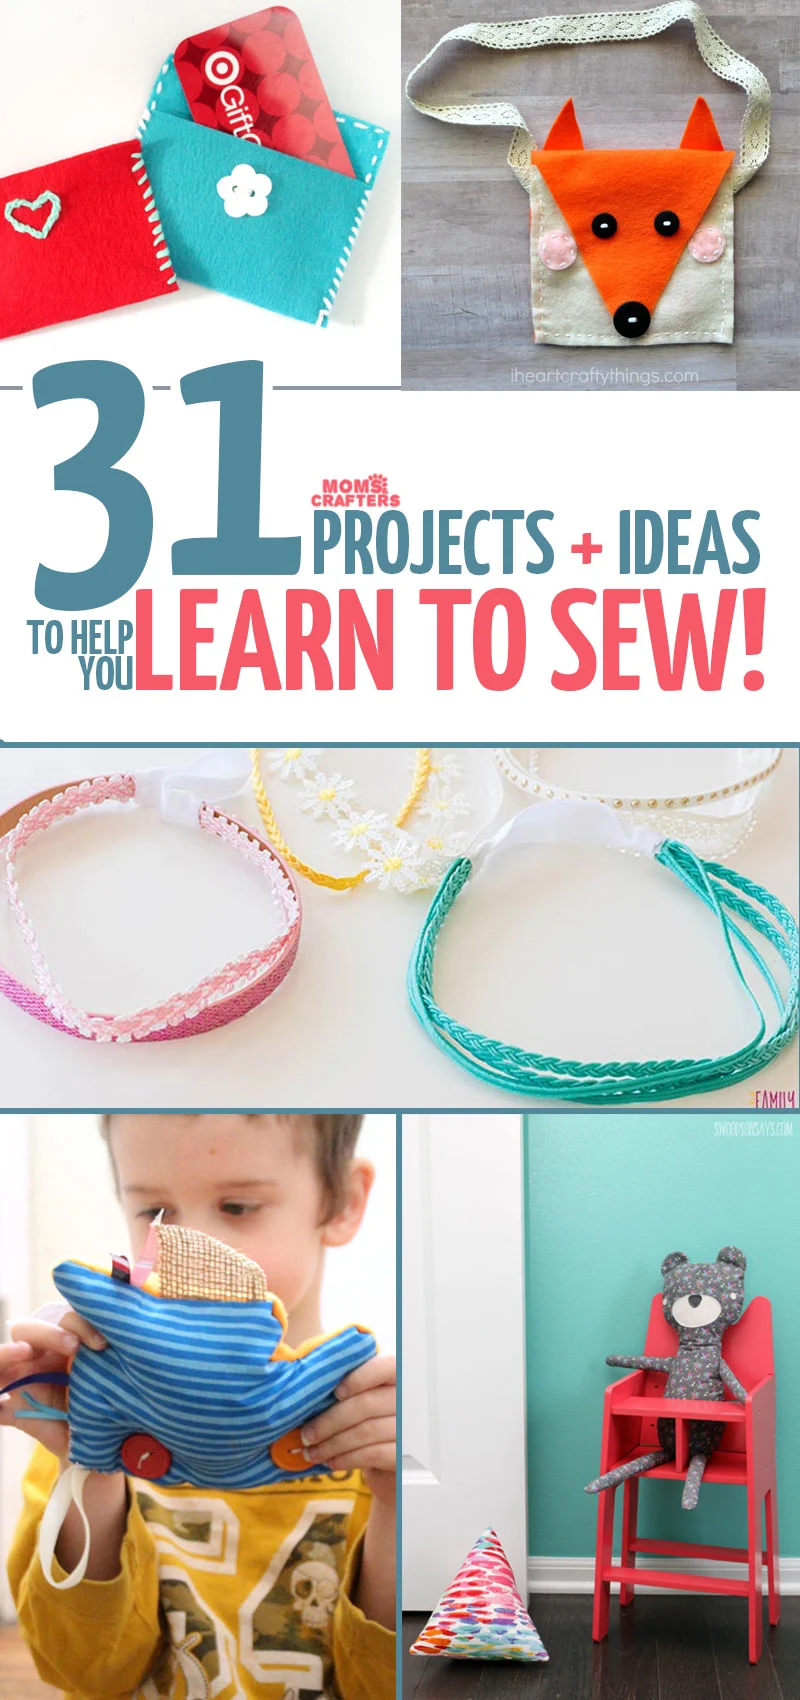 these easy sewing projects for kids, teens, tweens, and adults are perfect to learn to sew on! They incorporate basic hand sewing and machine sewing skills and include free sewing patterns for beginners.